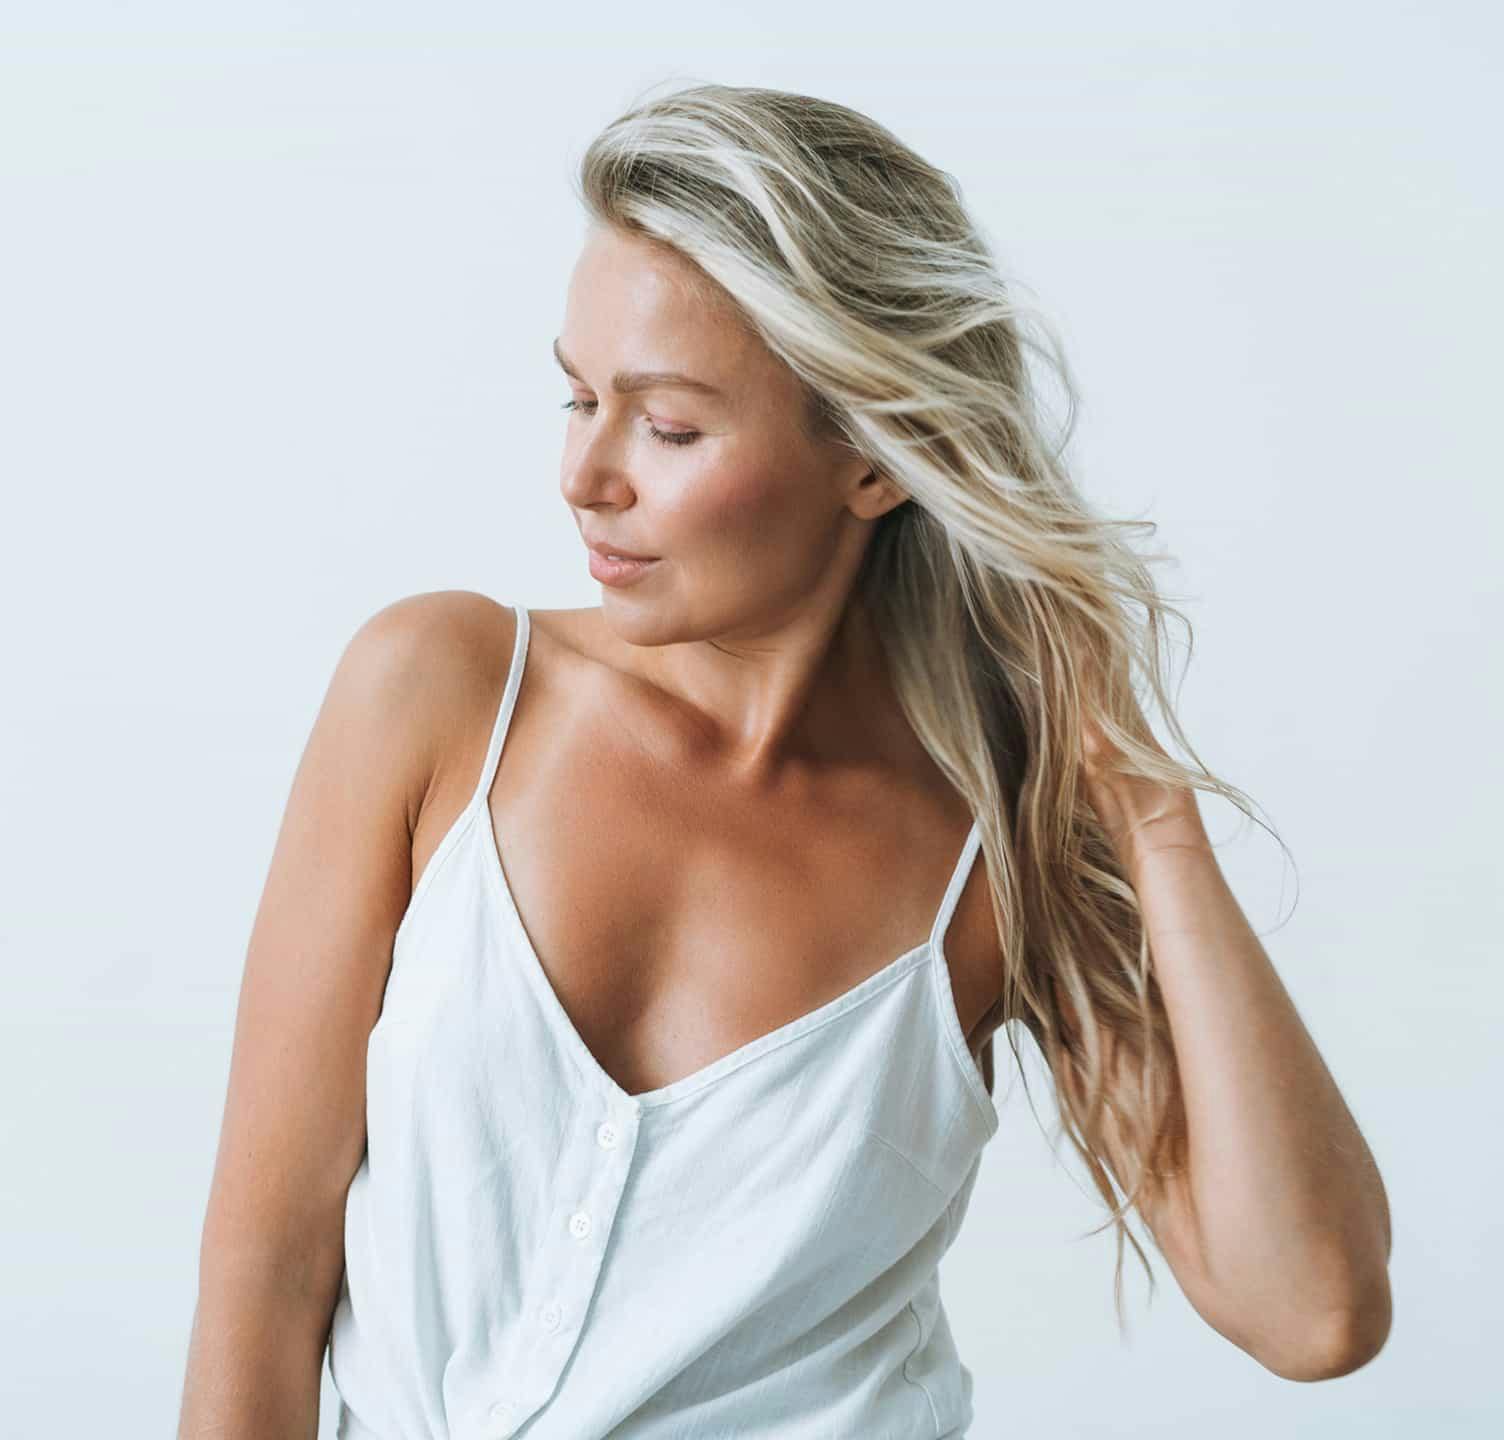 Woman with blonde hair wearing a white tank top